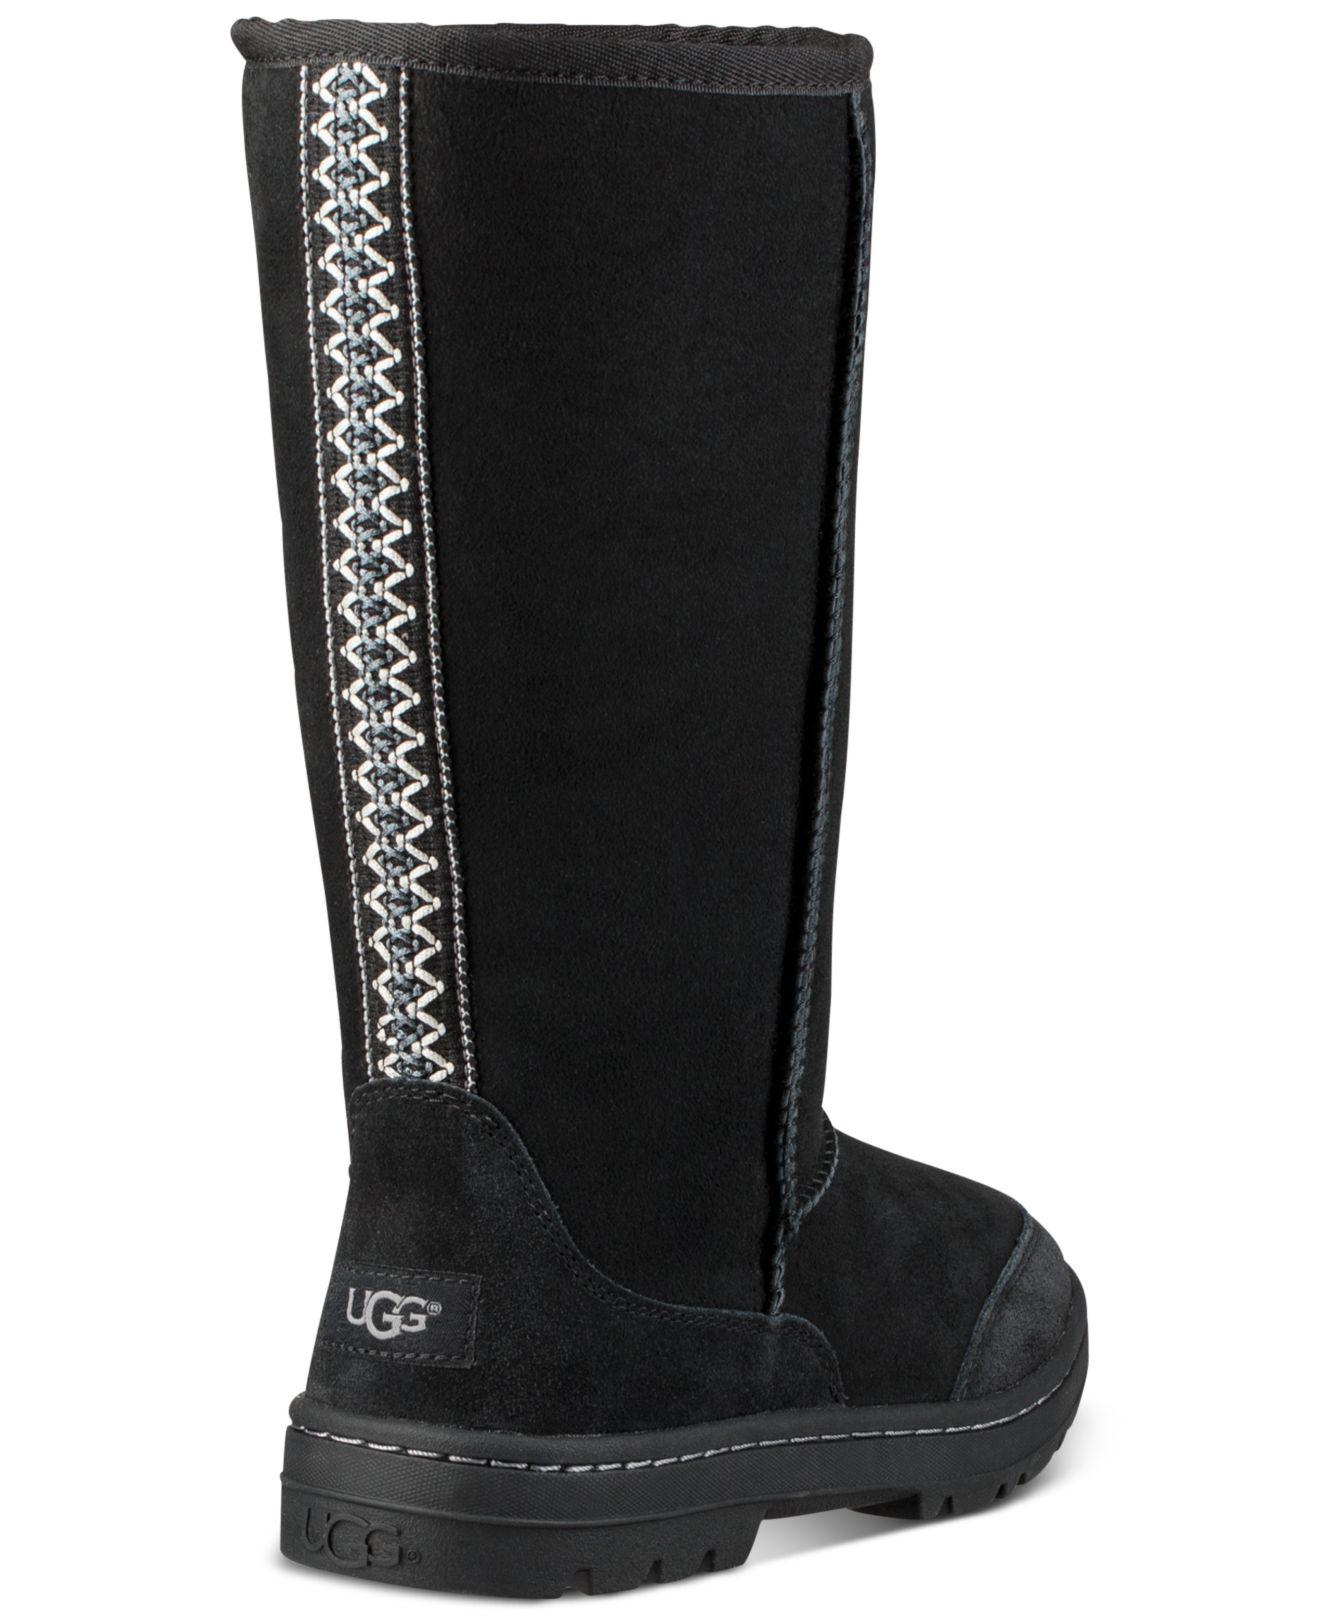 UGG Fur Ultra Tall Revival Boots in 